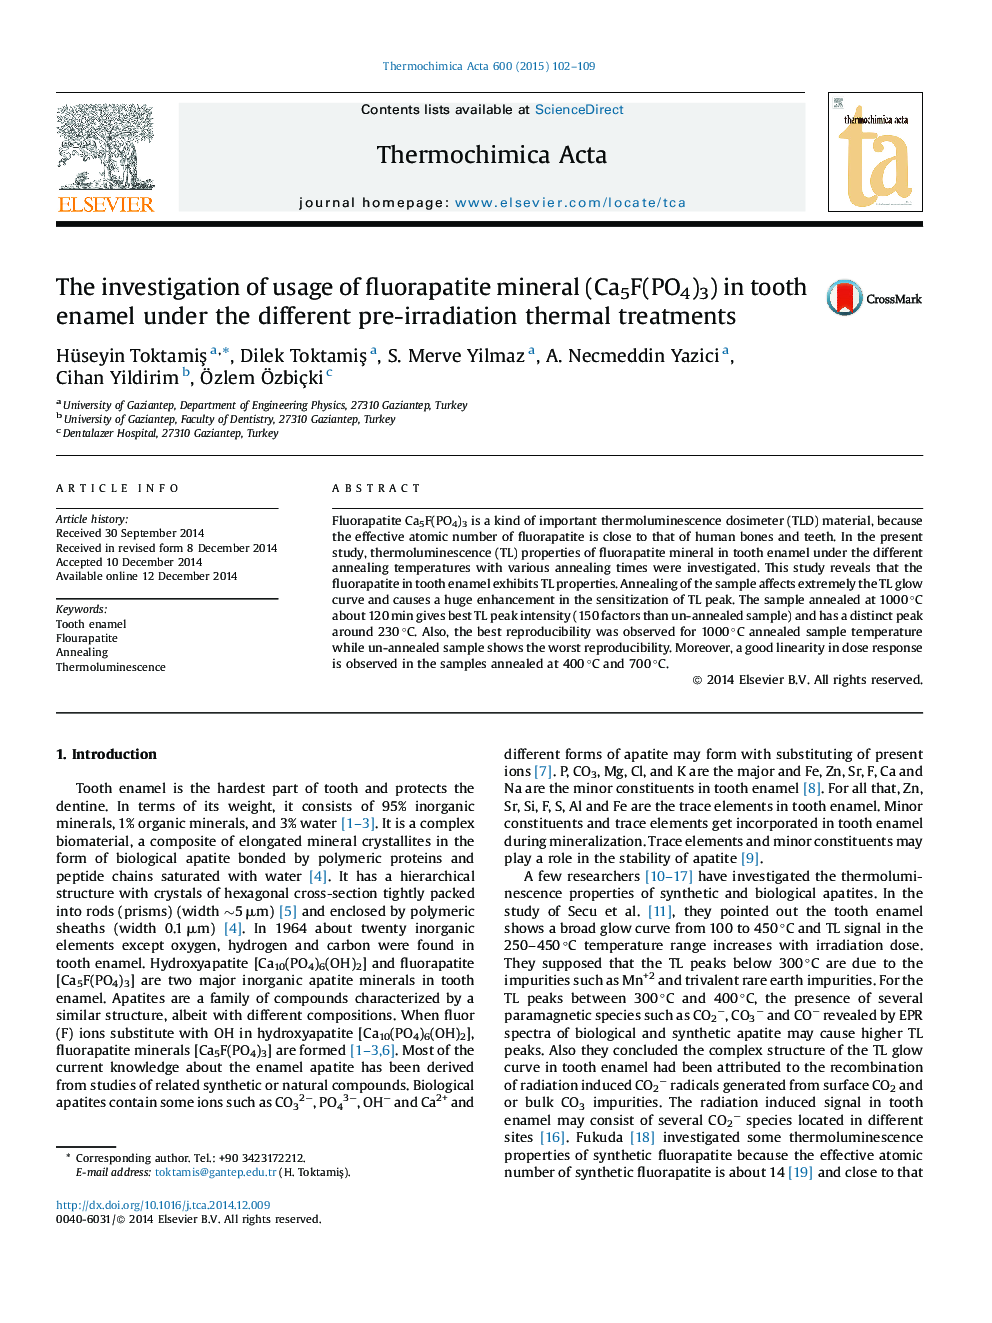 The investigation of usage of fluorapatite mineral (Ca5F(PO4)3) in tooth enamel under the different pre-irradiation thermal treatments